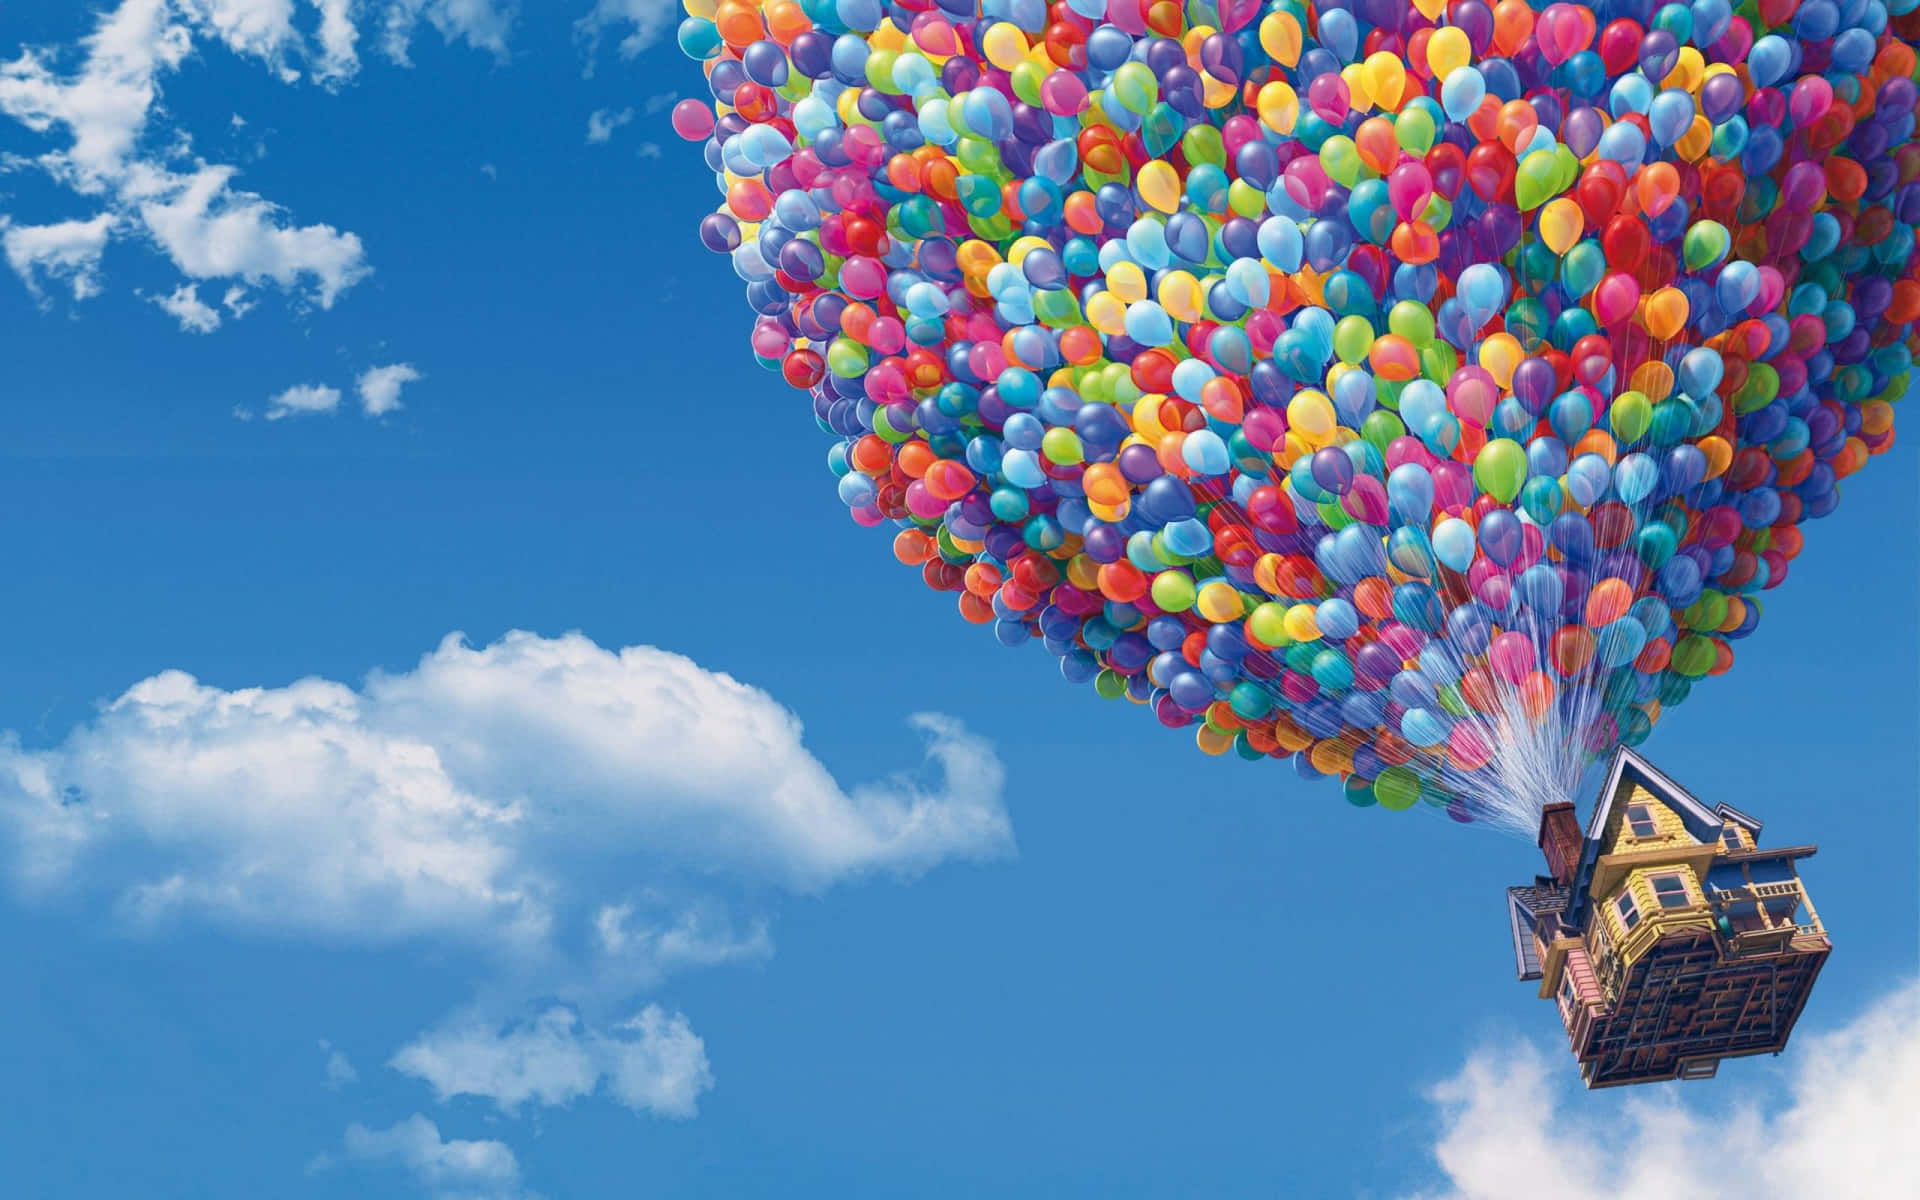 Best Disney Background The House Flying With Balloons